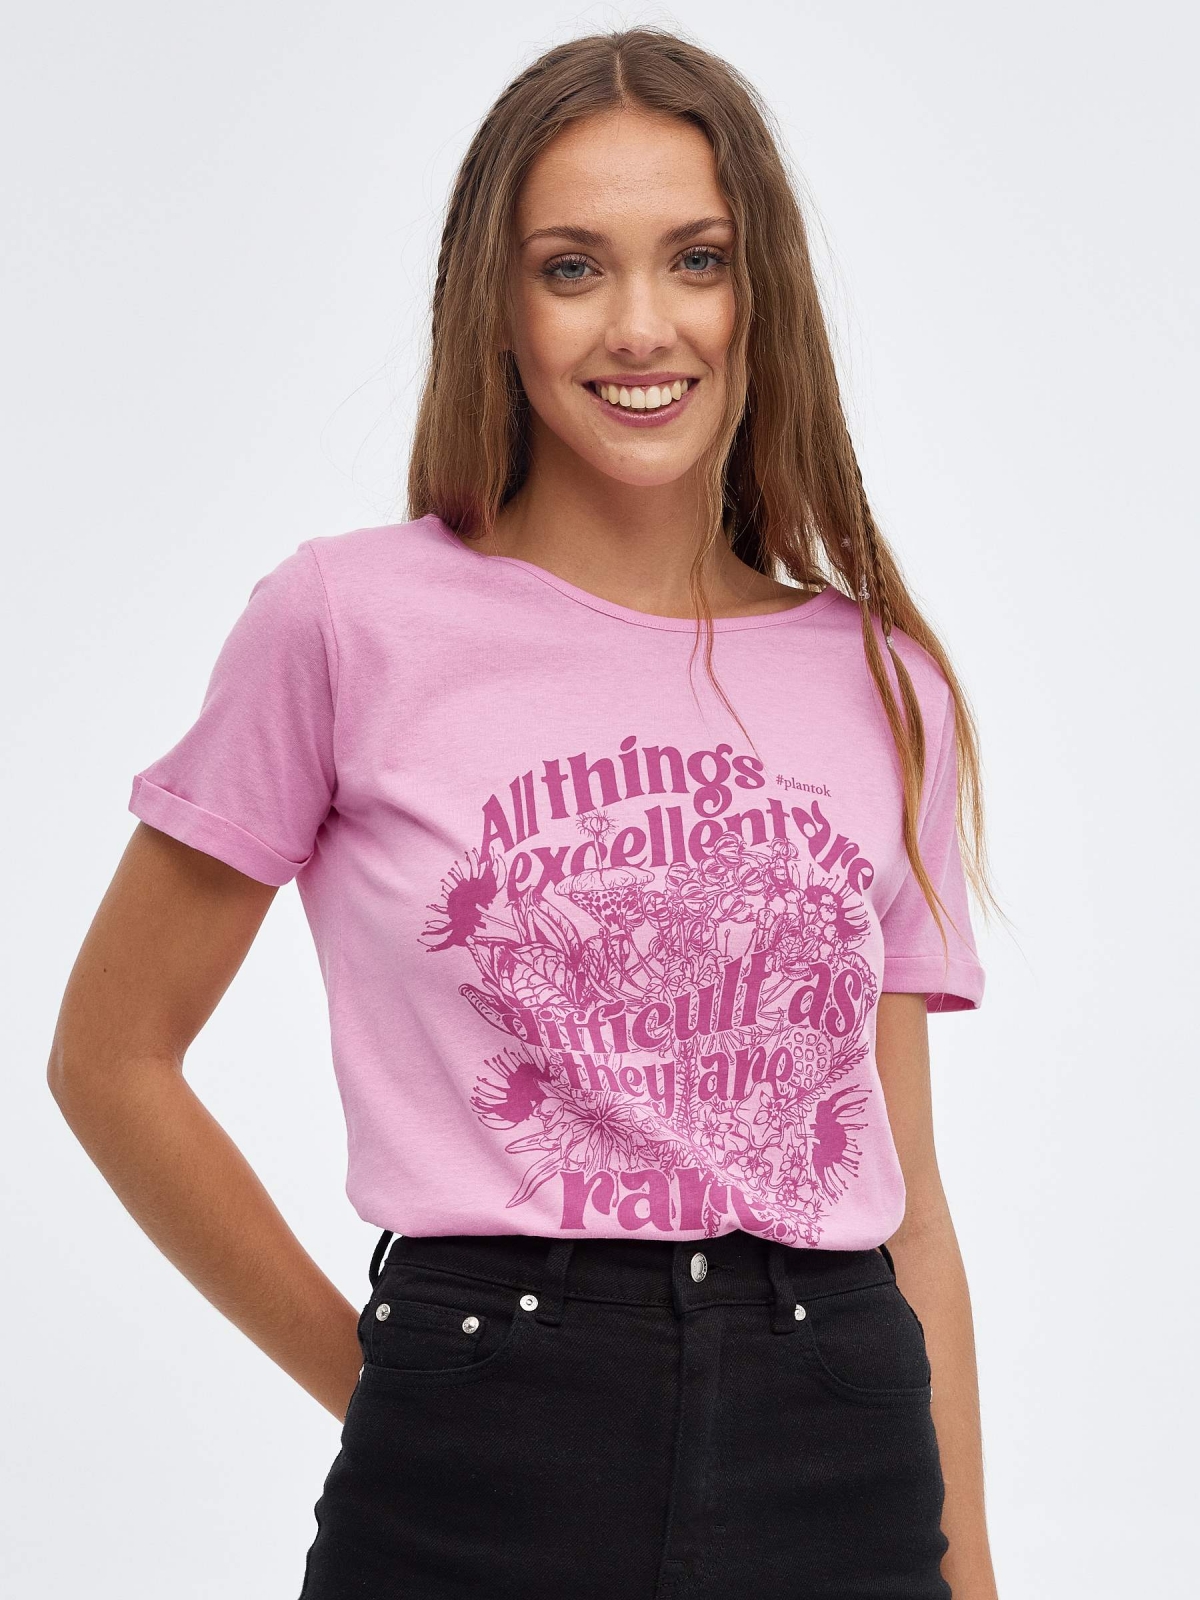 Camiseta All Things Excellent rosa vista media frontal